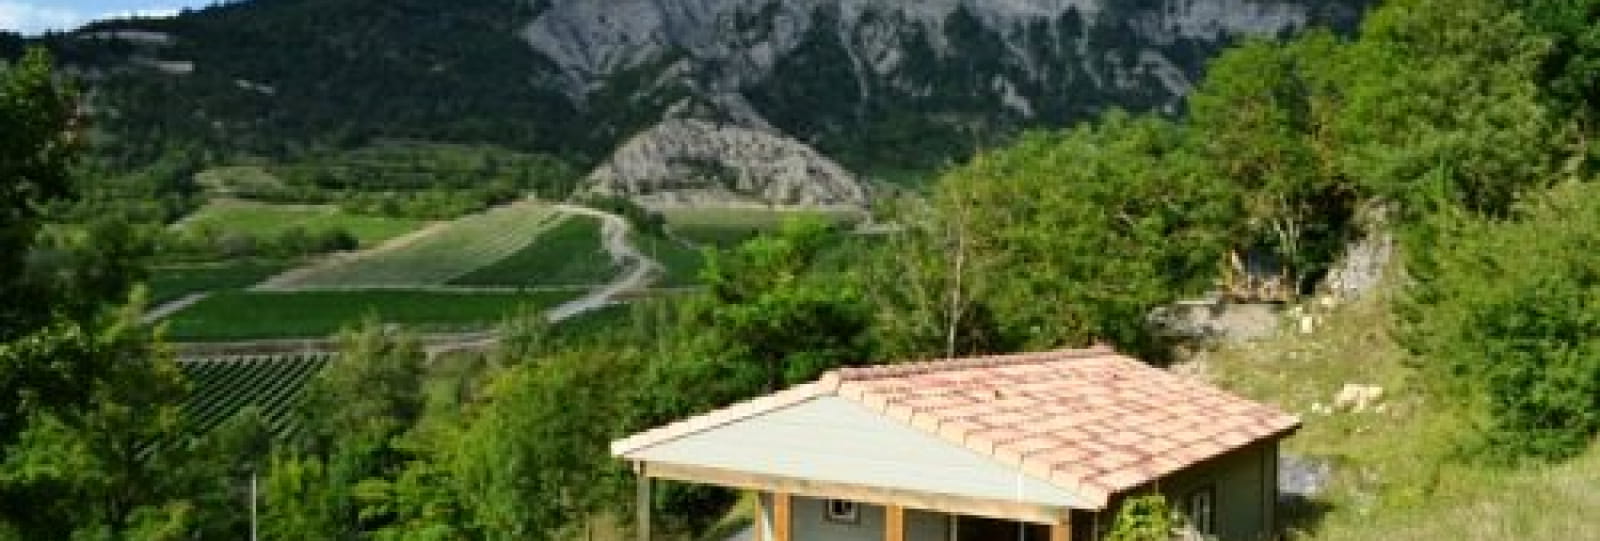 CAMPING LA COLOMBE - Chalet 2